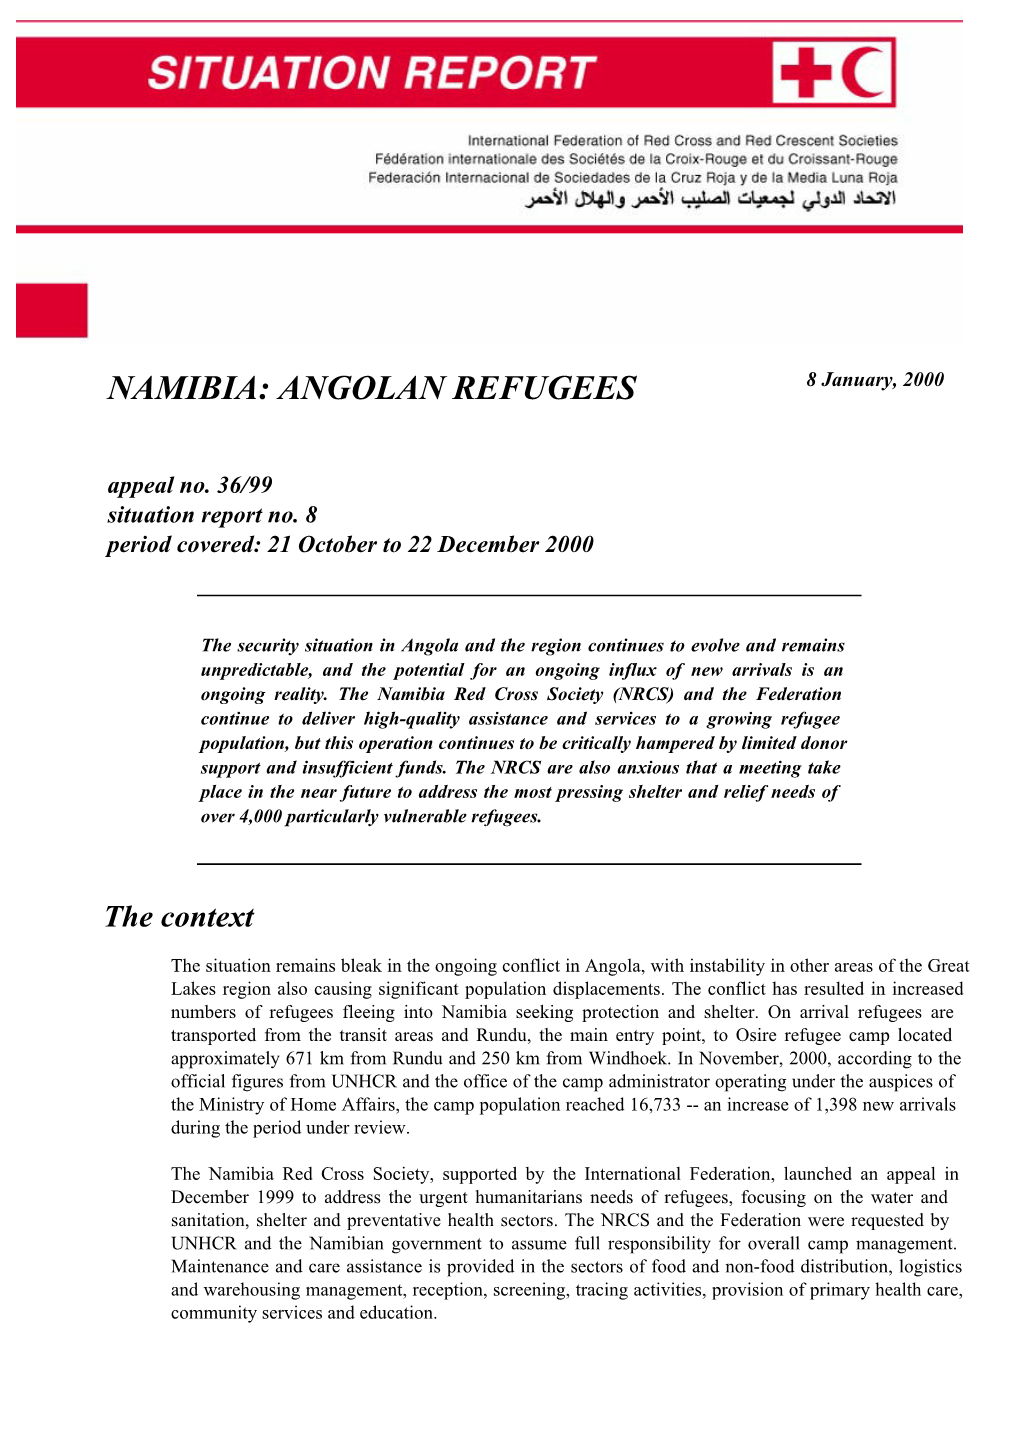 NAMIBIA ANGOLAN REFUGEES (Appeal 36/99)